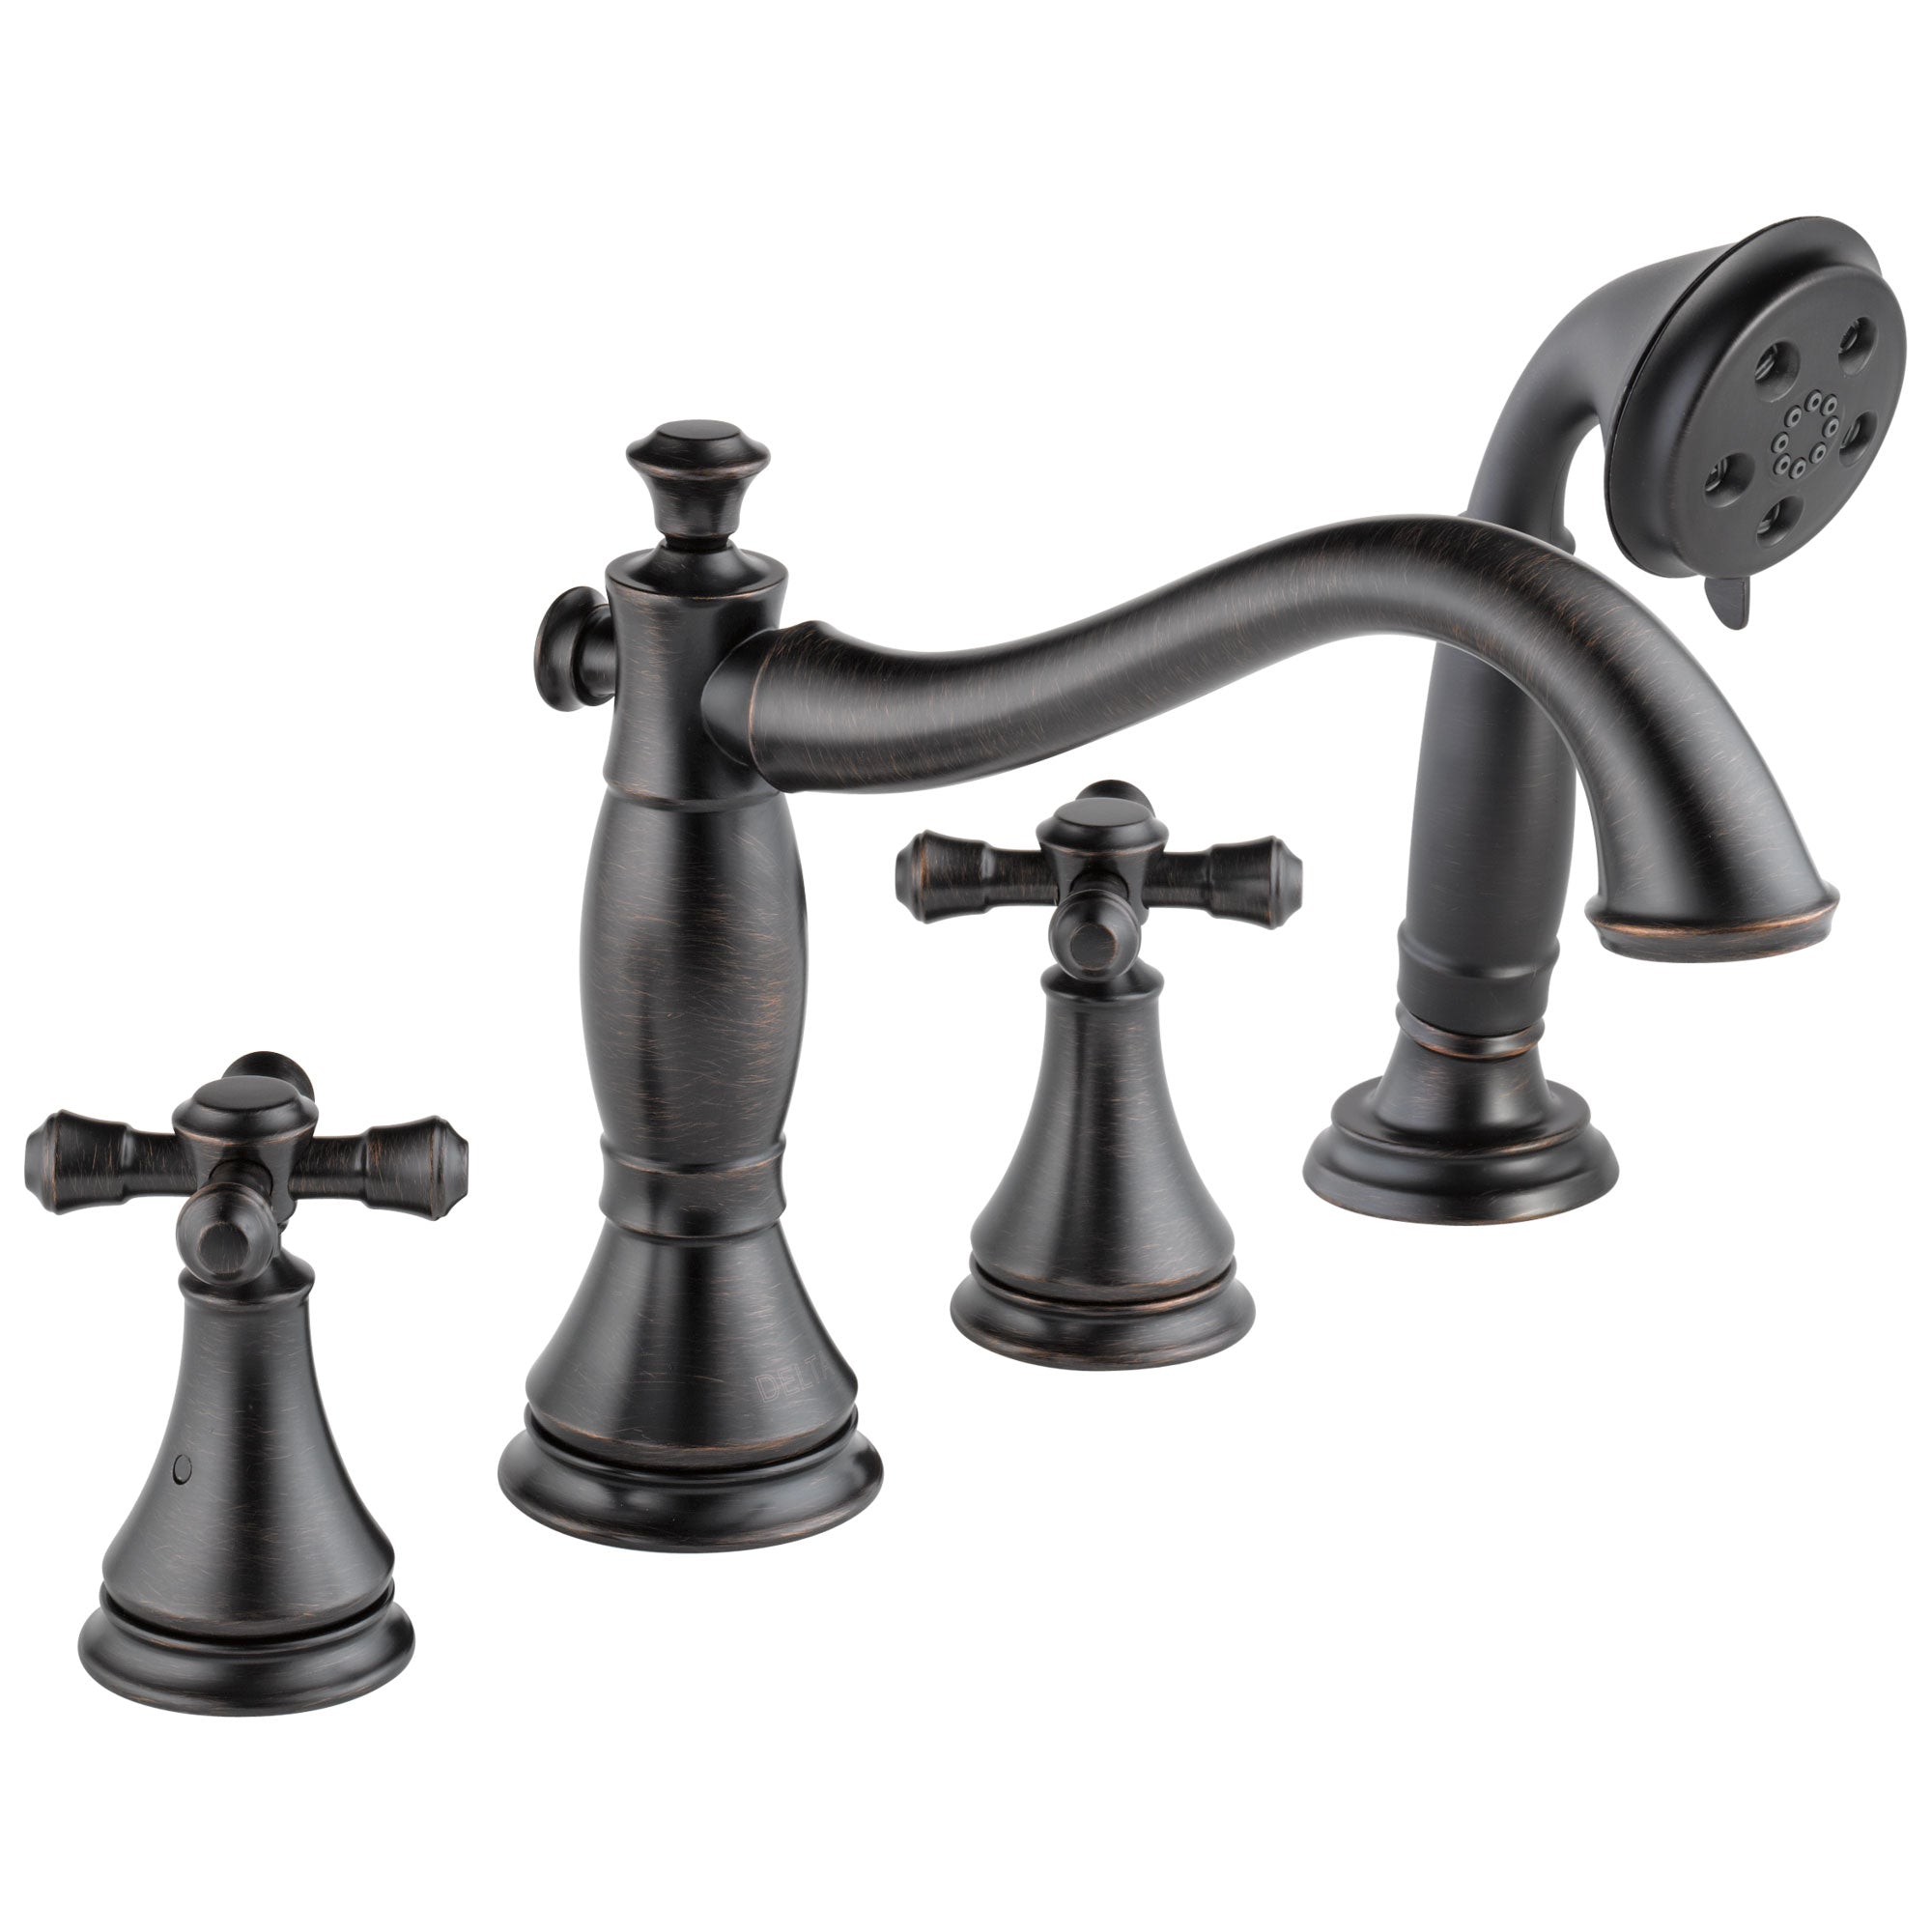 Delta Cassidy Collection Venetian Bronze Finish Roman Tub Filler Faucet with Hand Shower INCLUDES (2) Cross Handles and Rough-in Valve D1394V